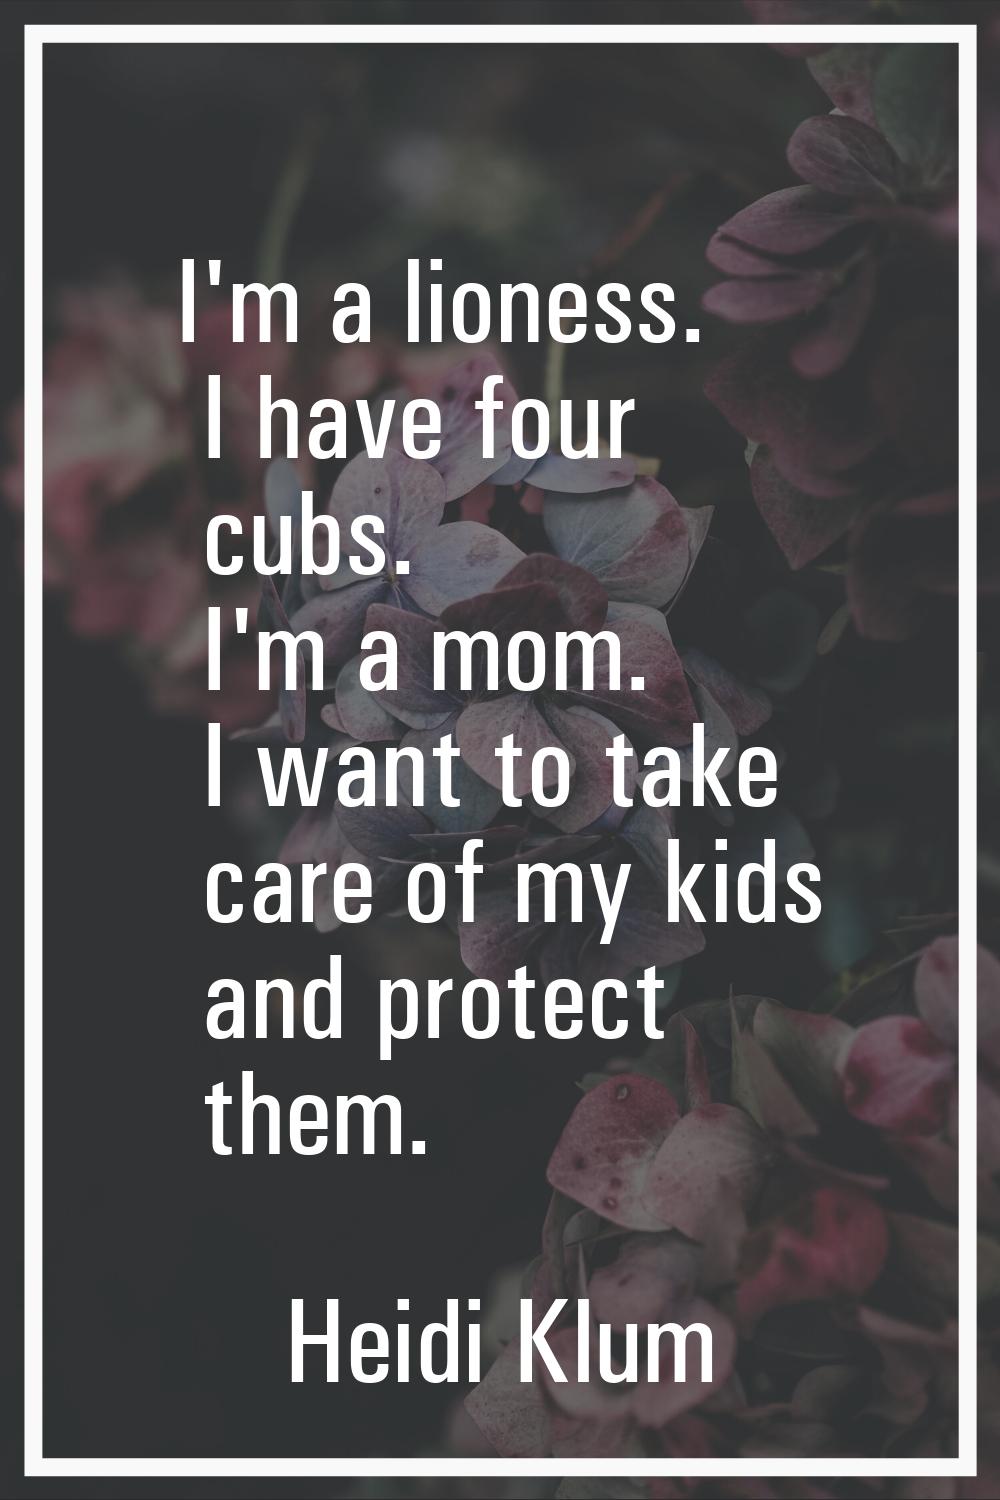 I'm a lioness. I have four cubs. I'm a mom. I want to take care of my kids and protect them.